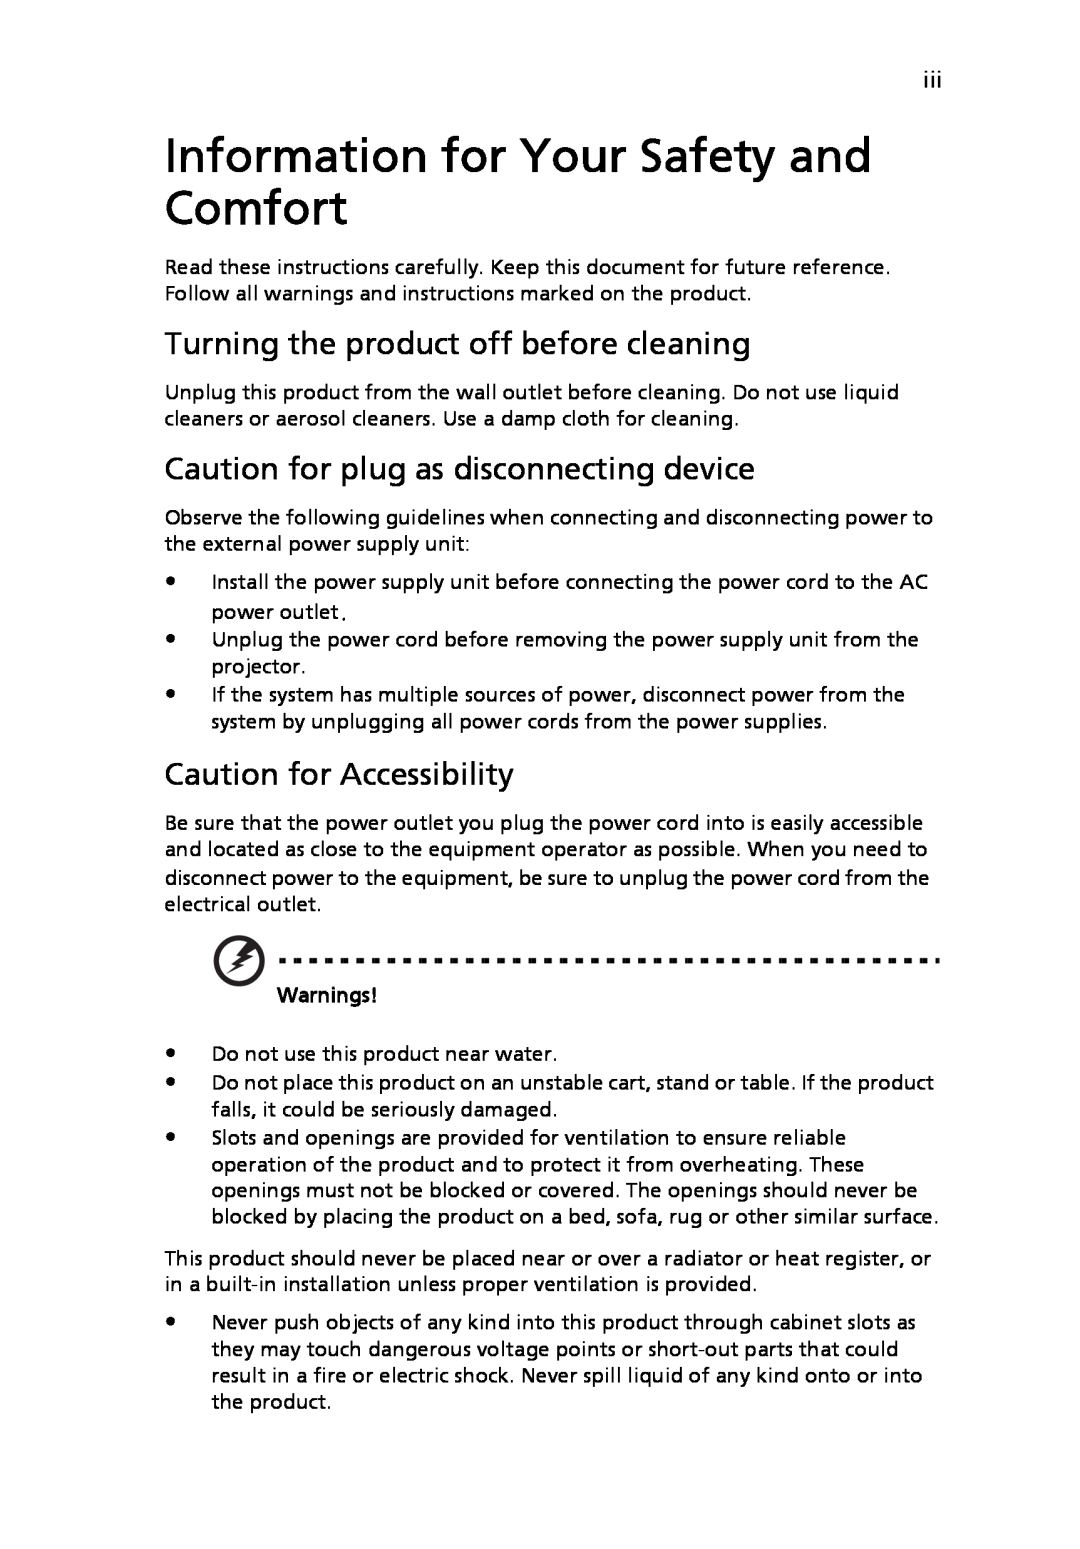 Acer P5205 Information for Your Safety and Comfort, Turning the product off before cleaning, Caution for Accessibility 